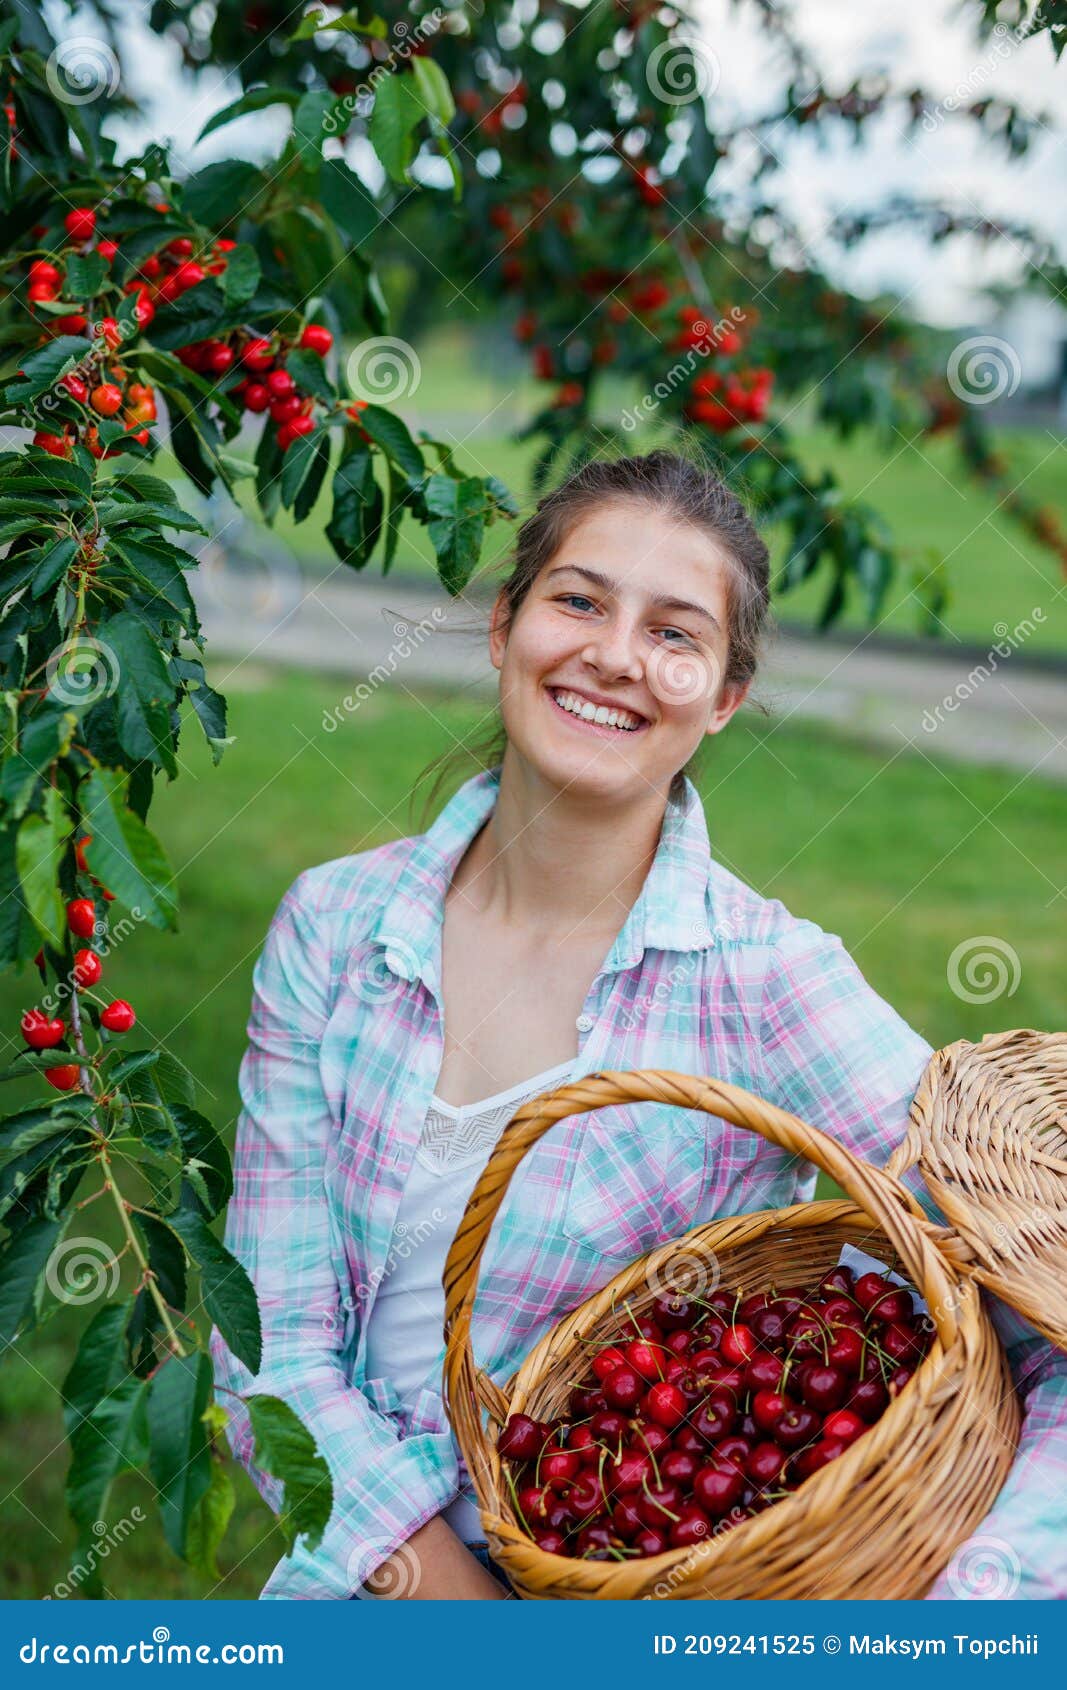 Pretty Young Girl Picking Cherry in Garden Stock Image - Image of sunny ...